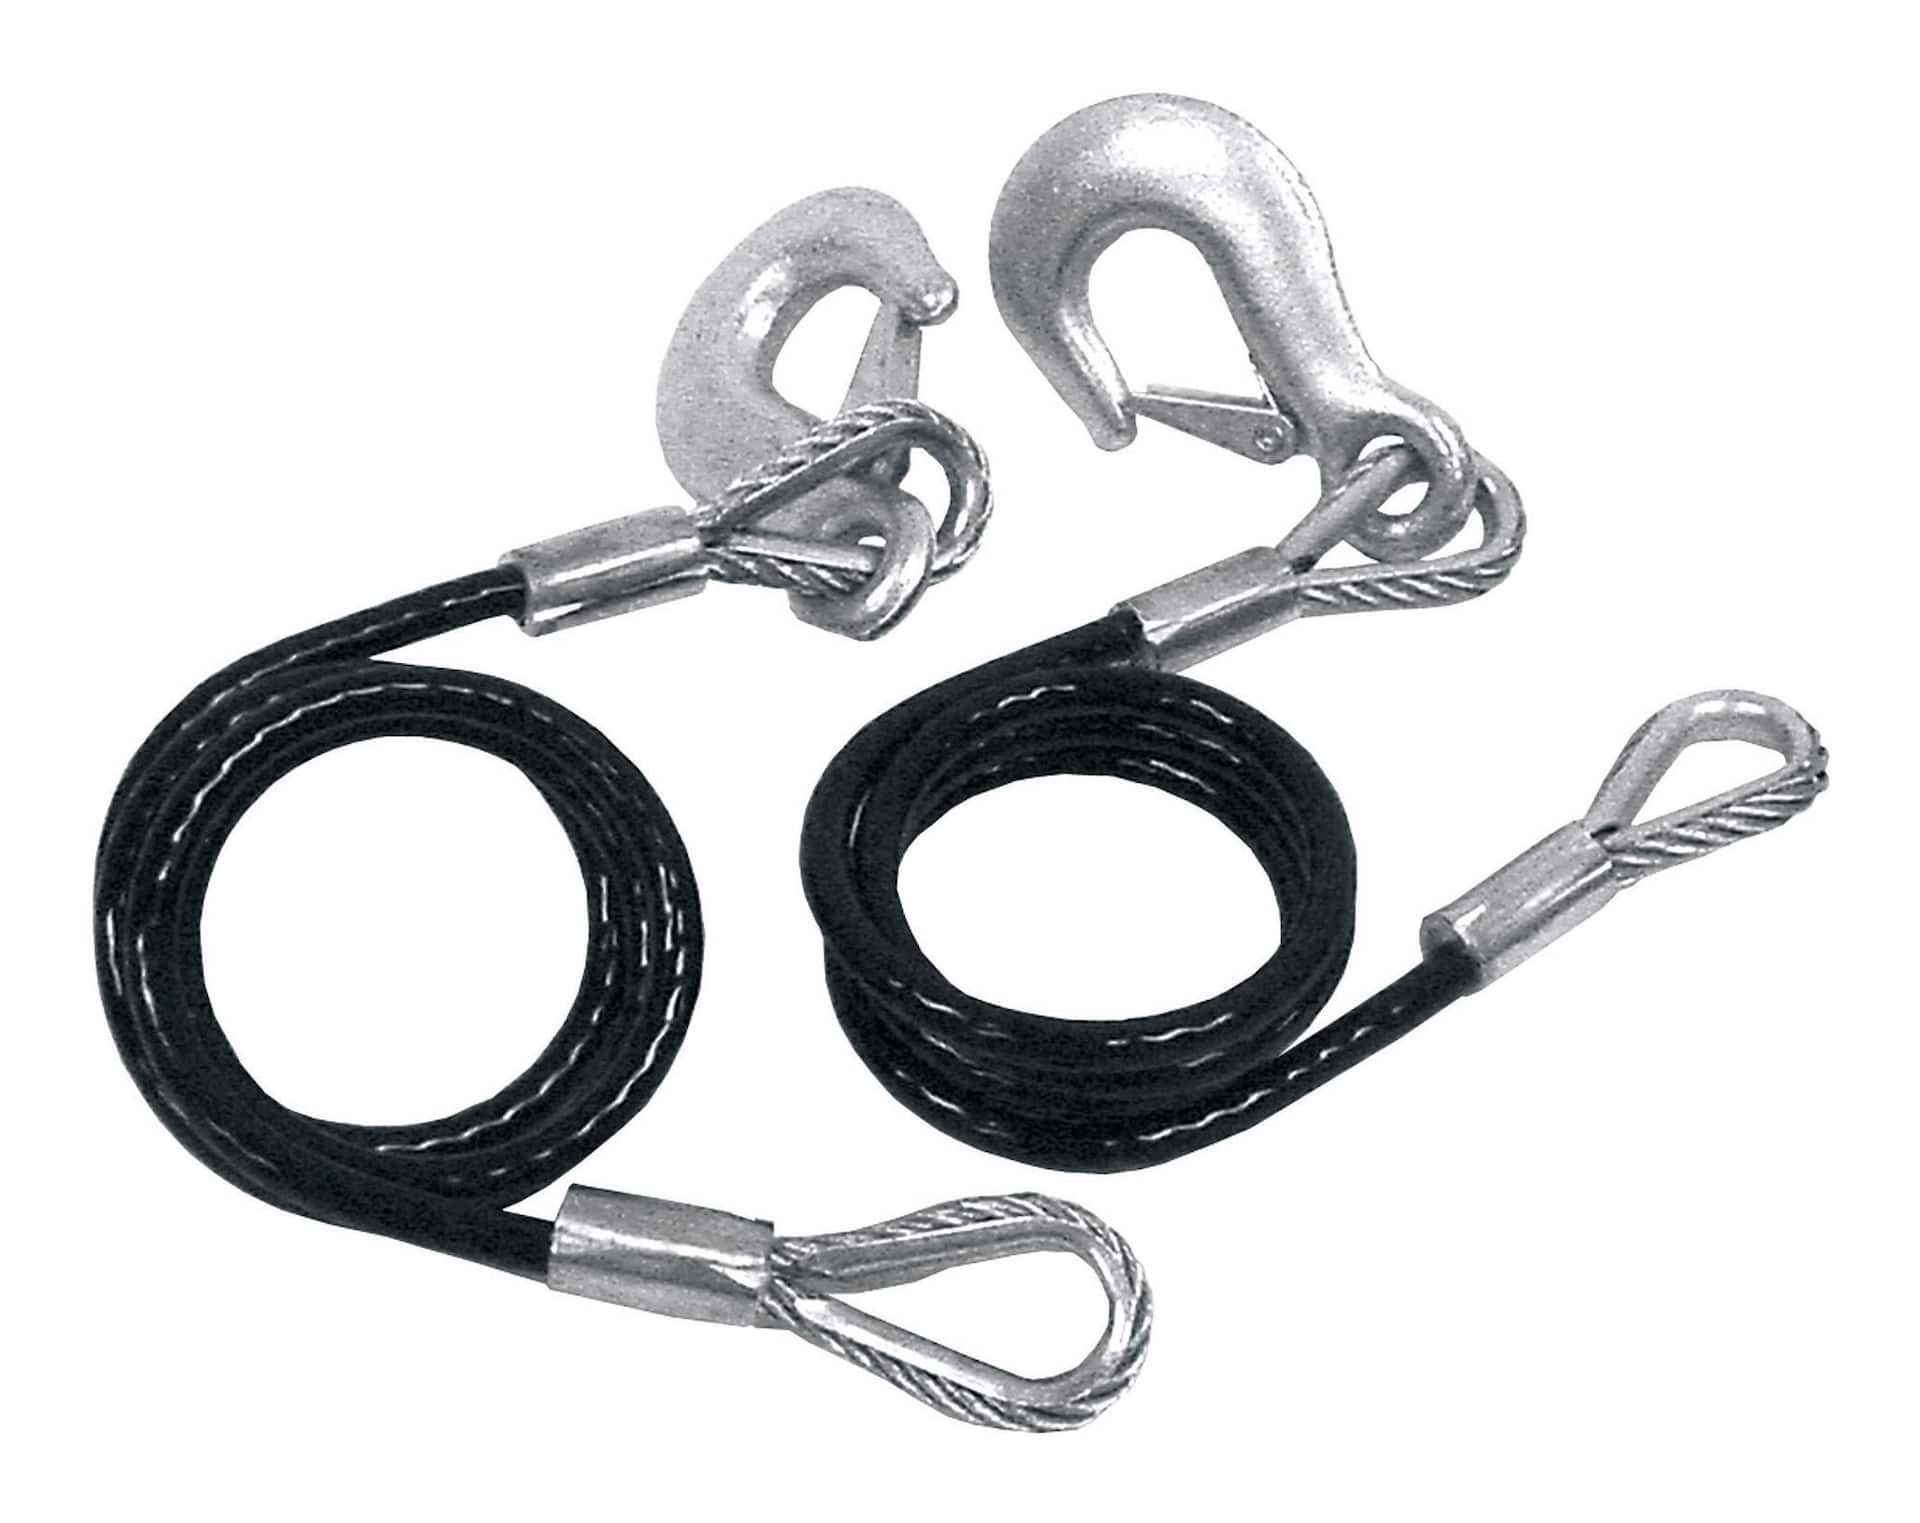 Wonder World ™Bungee Cords with Hooks Bungee Cord Price in India - Buy  Wonder World ™Bungee Cords with Hooks Bungee Cord online at